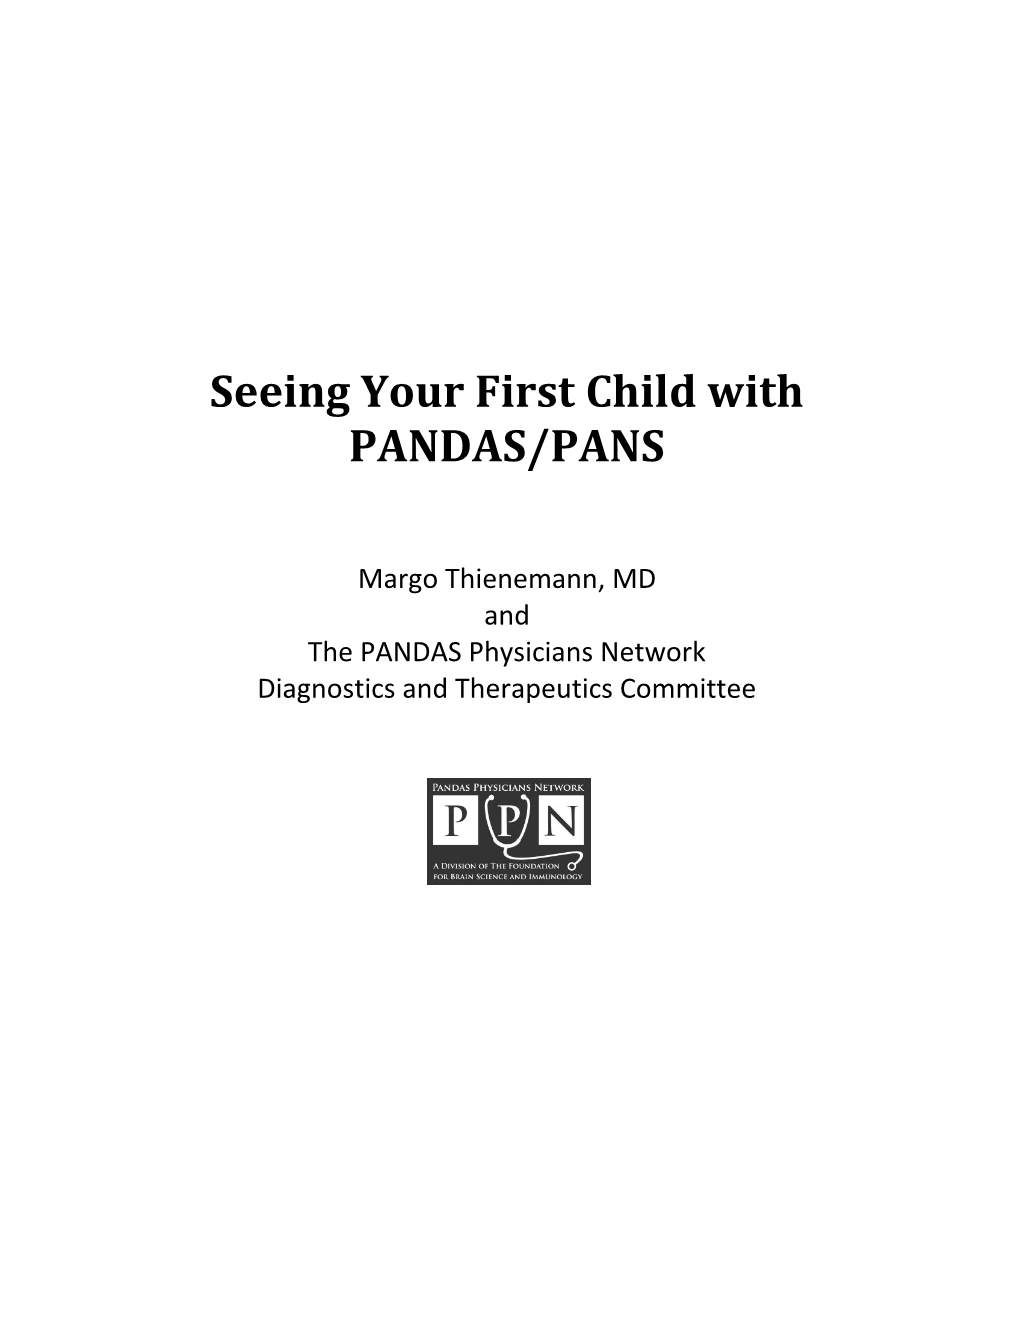 Seeing Your First Child with PANDAS/PANS